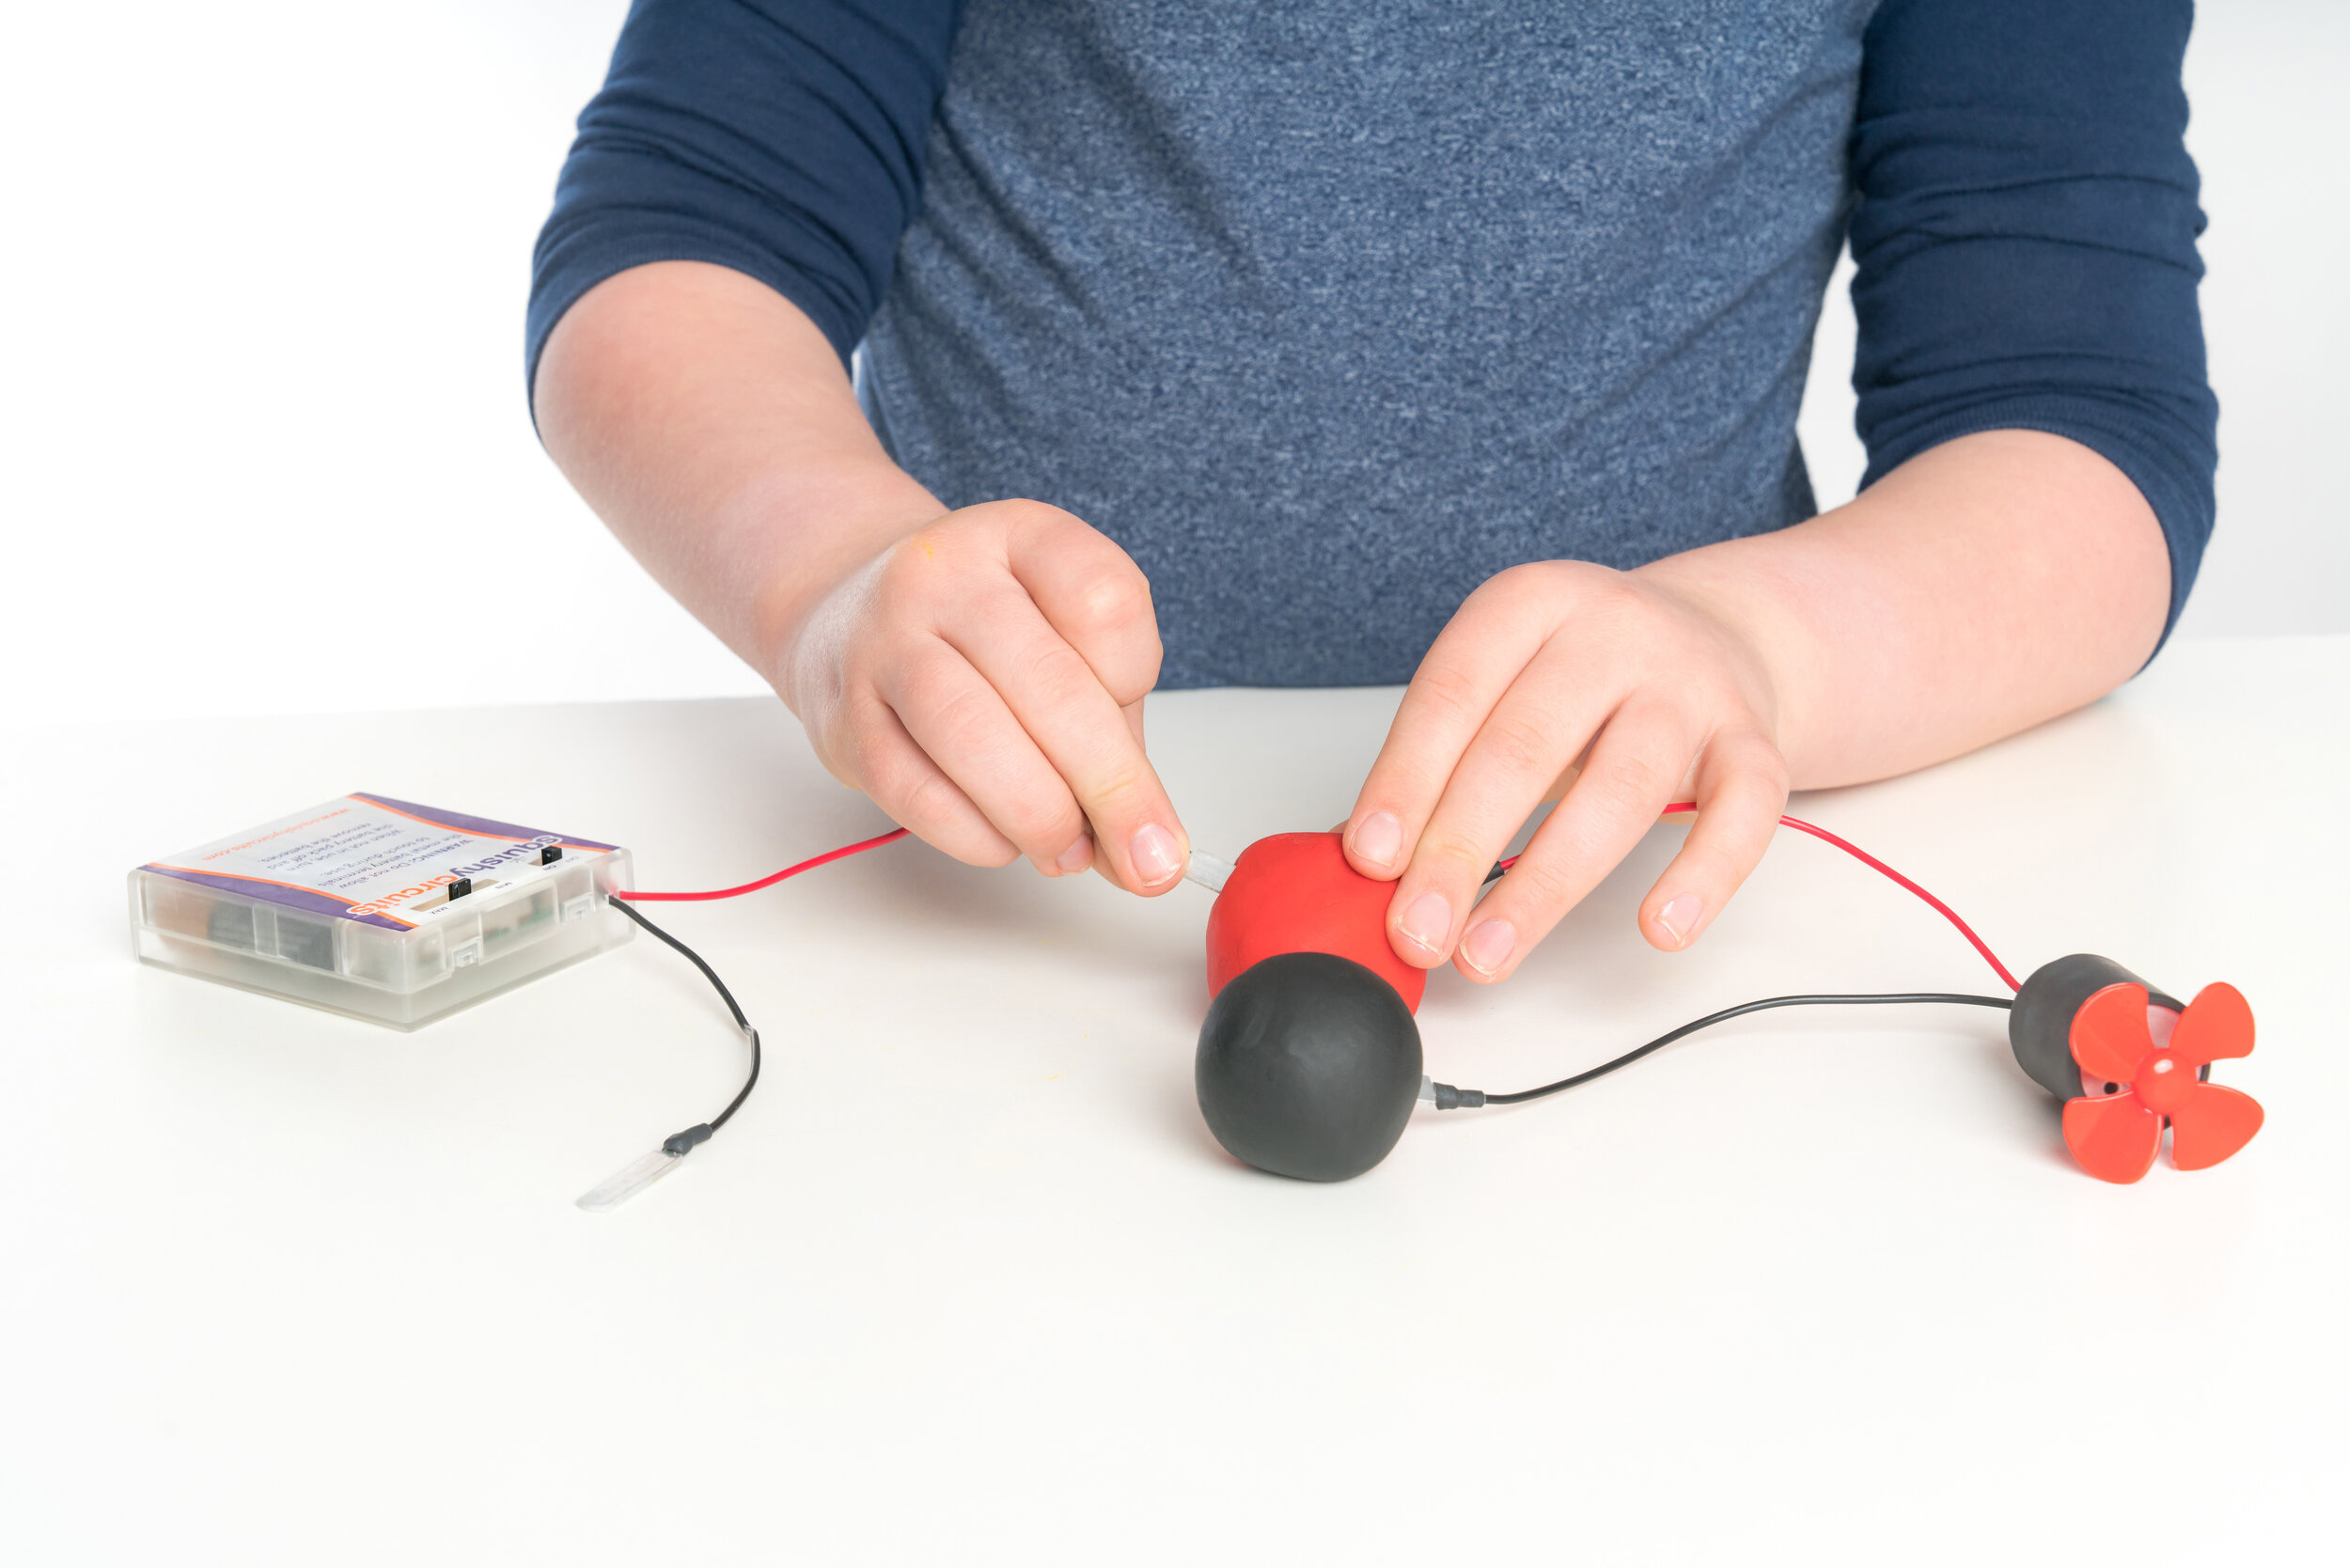 Squishy Circuits — The Playful Learning Lab